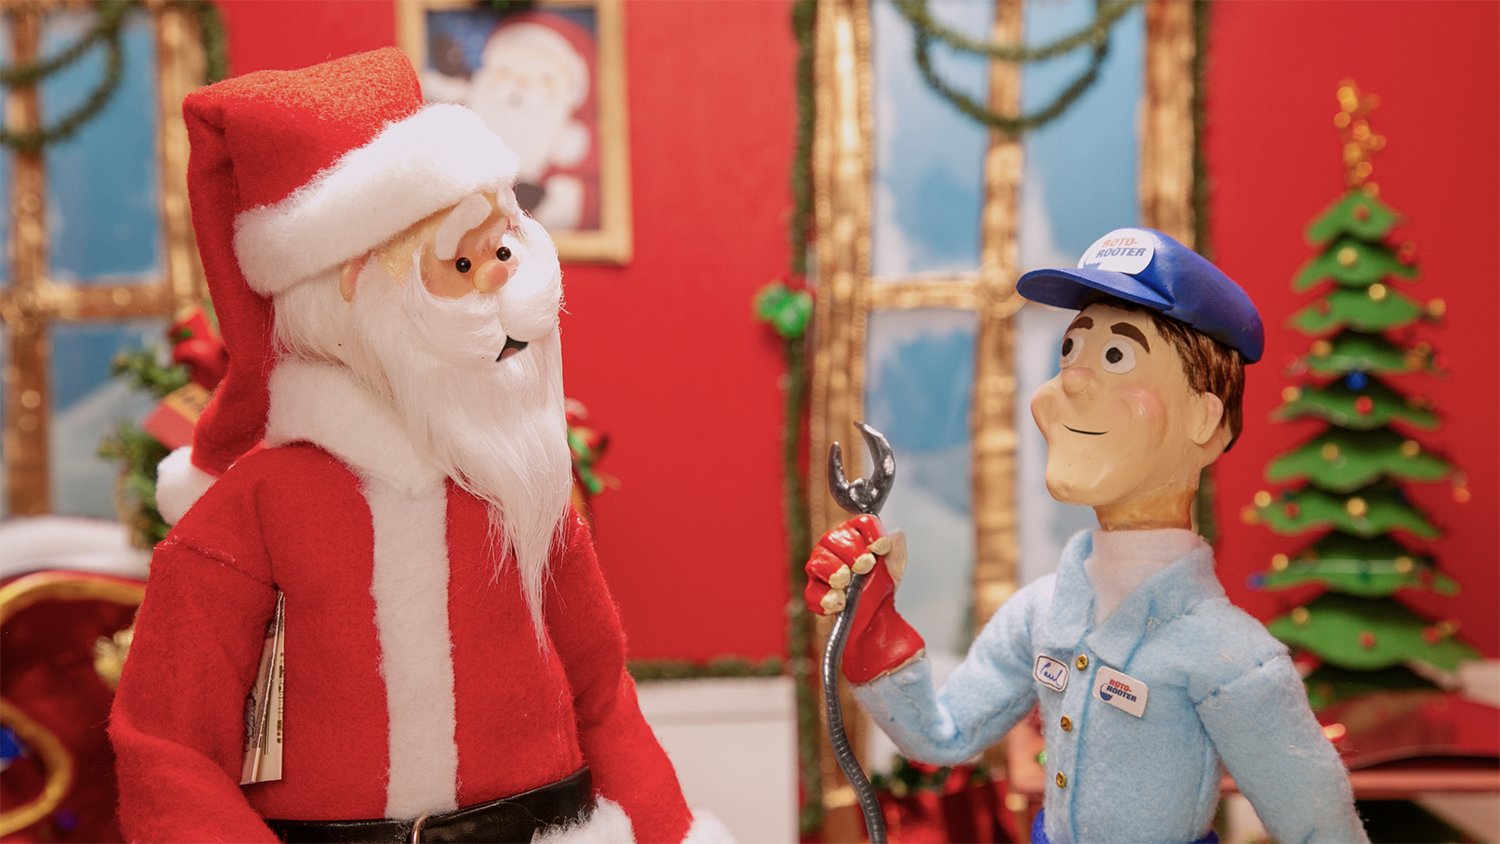 Santa and the Roto Rooter man with VFX completed by Foxtrot X-Ray